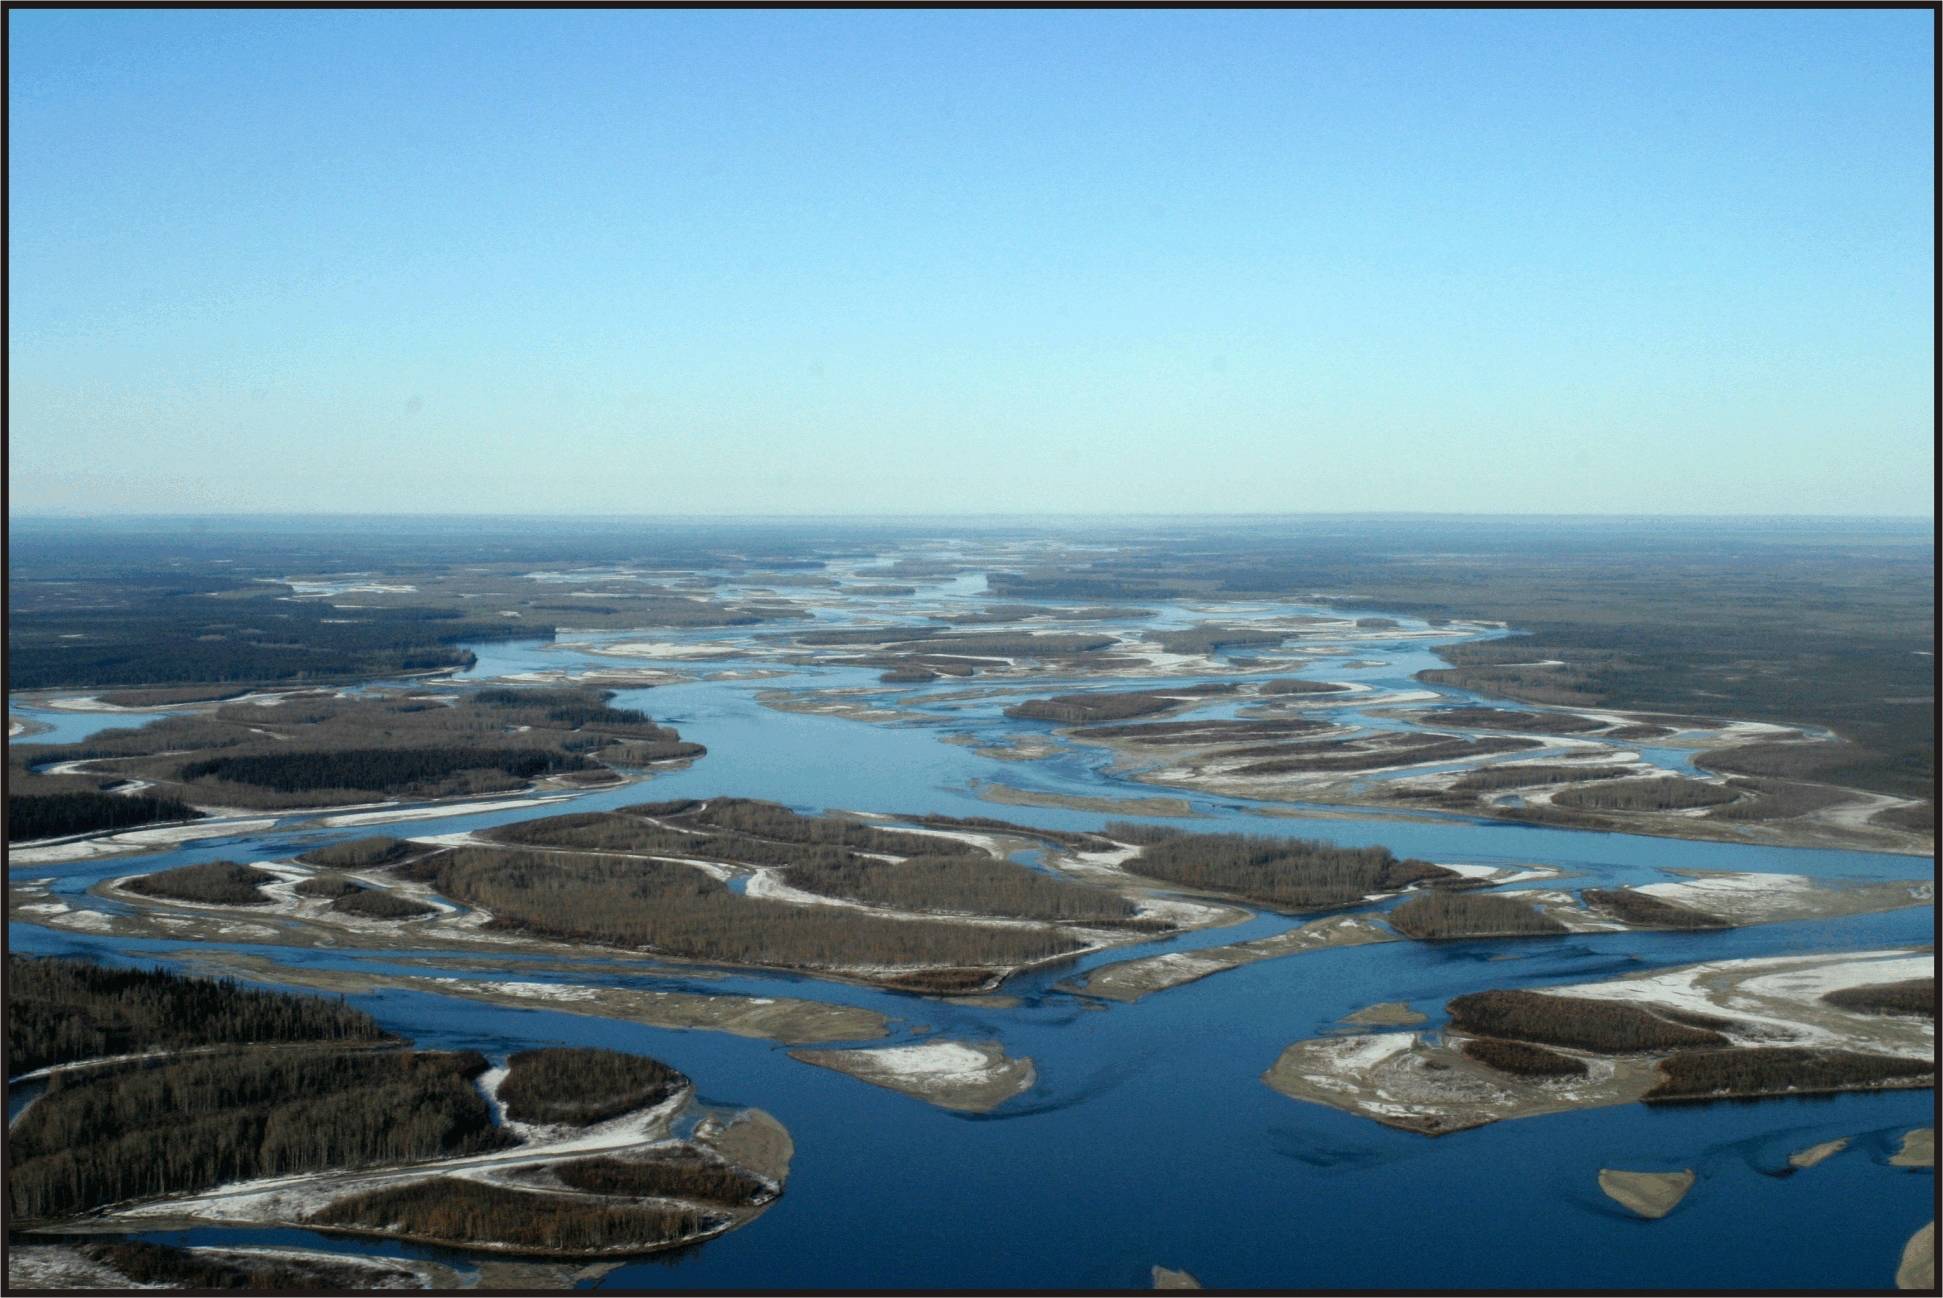 Yukon Flats — a portion of the Yukon River between the towns of Circle and Fort Yukon — where many whitefish spawn. (Courtesy Photo / Randy Brown)